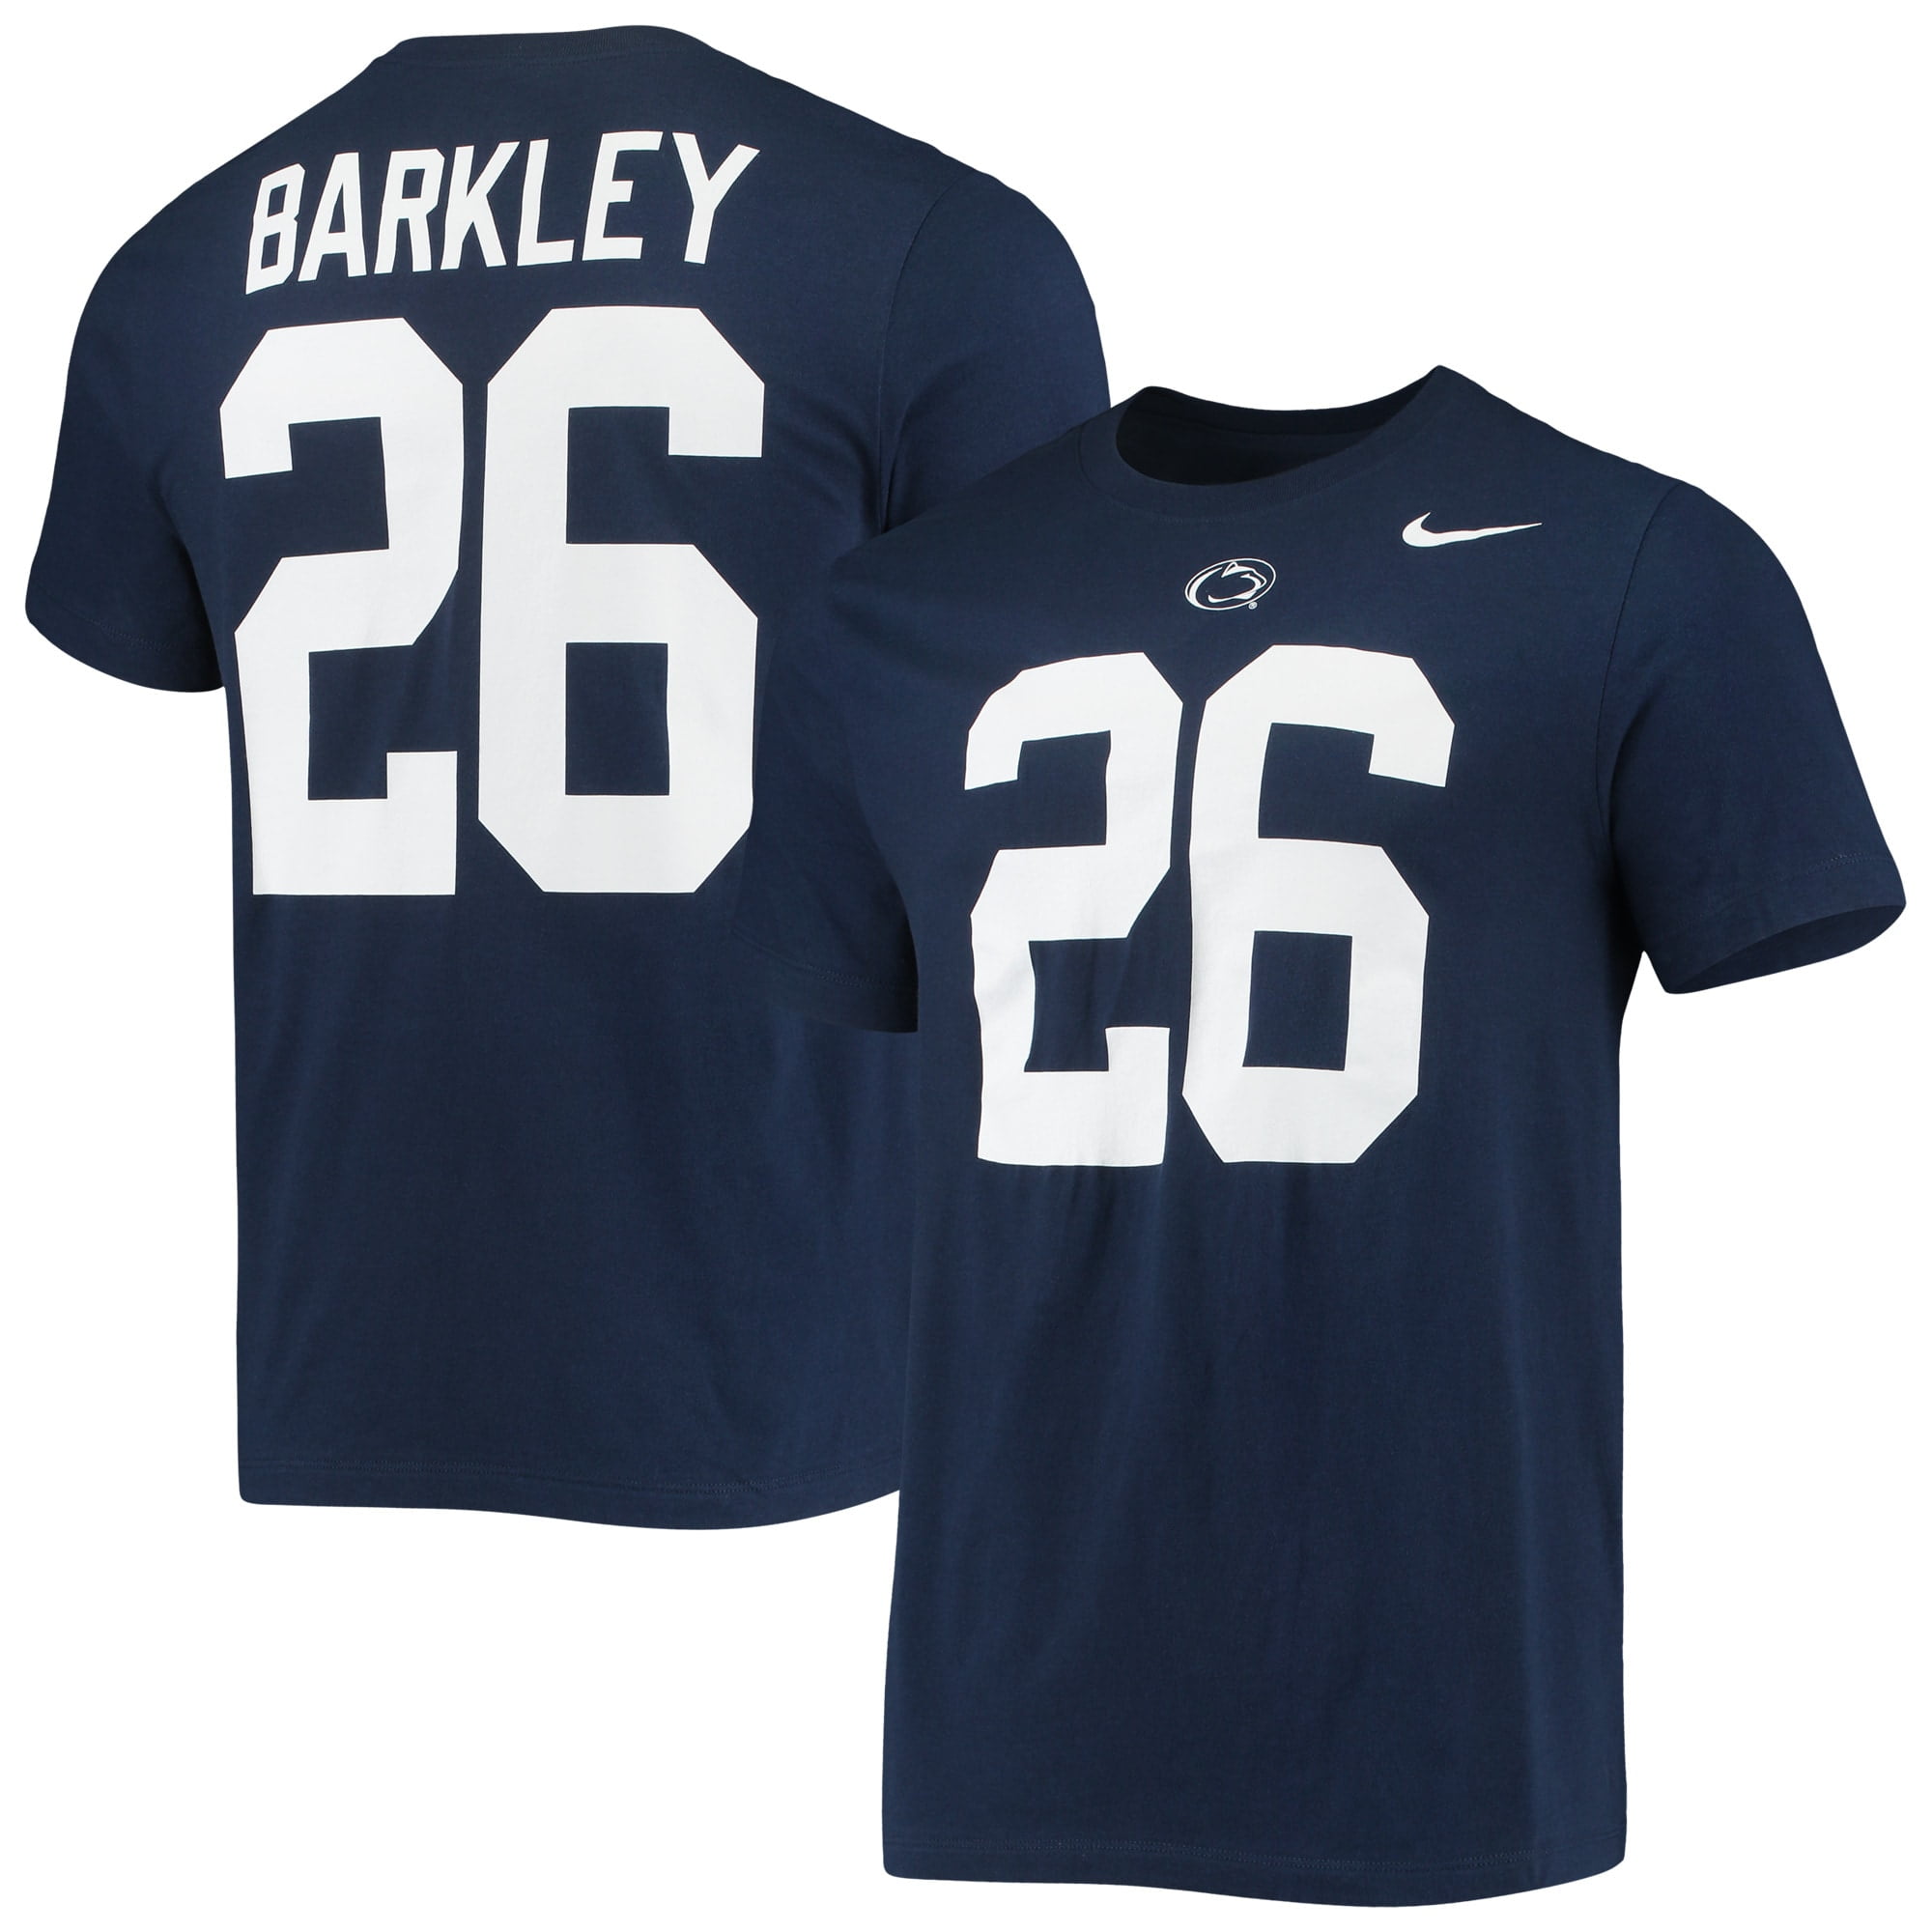 Penn State Nittany Lions ncaa Jersey Shirt Adult MEN/MENS/MEN'S $25 s-small 